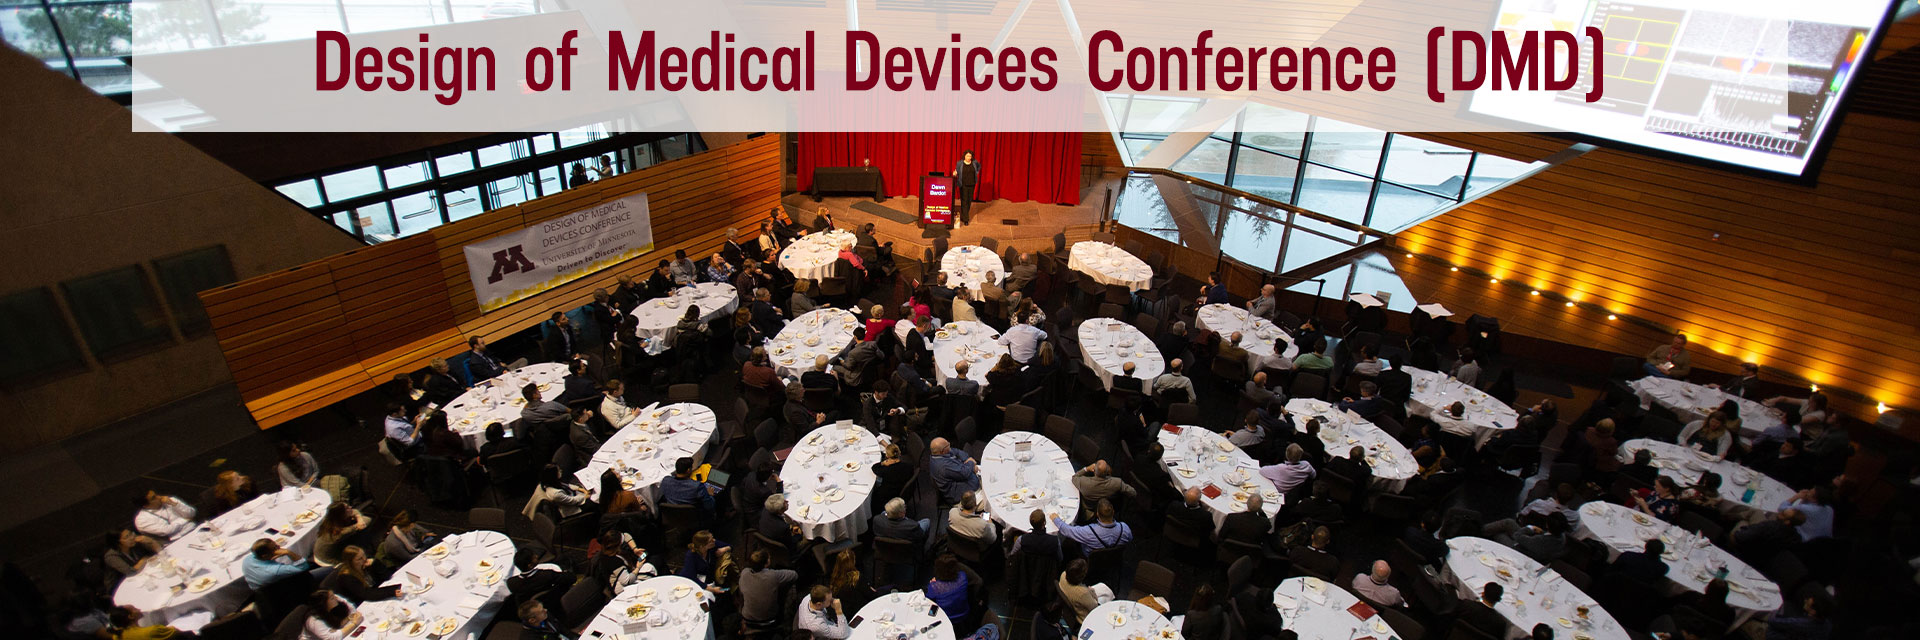 Design of Medical Devices Conference (DMD)